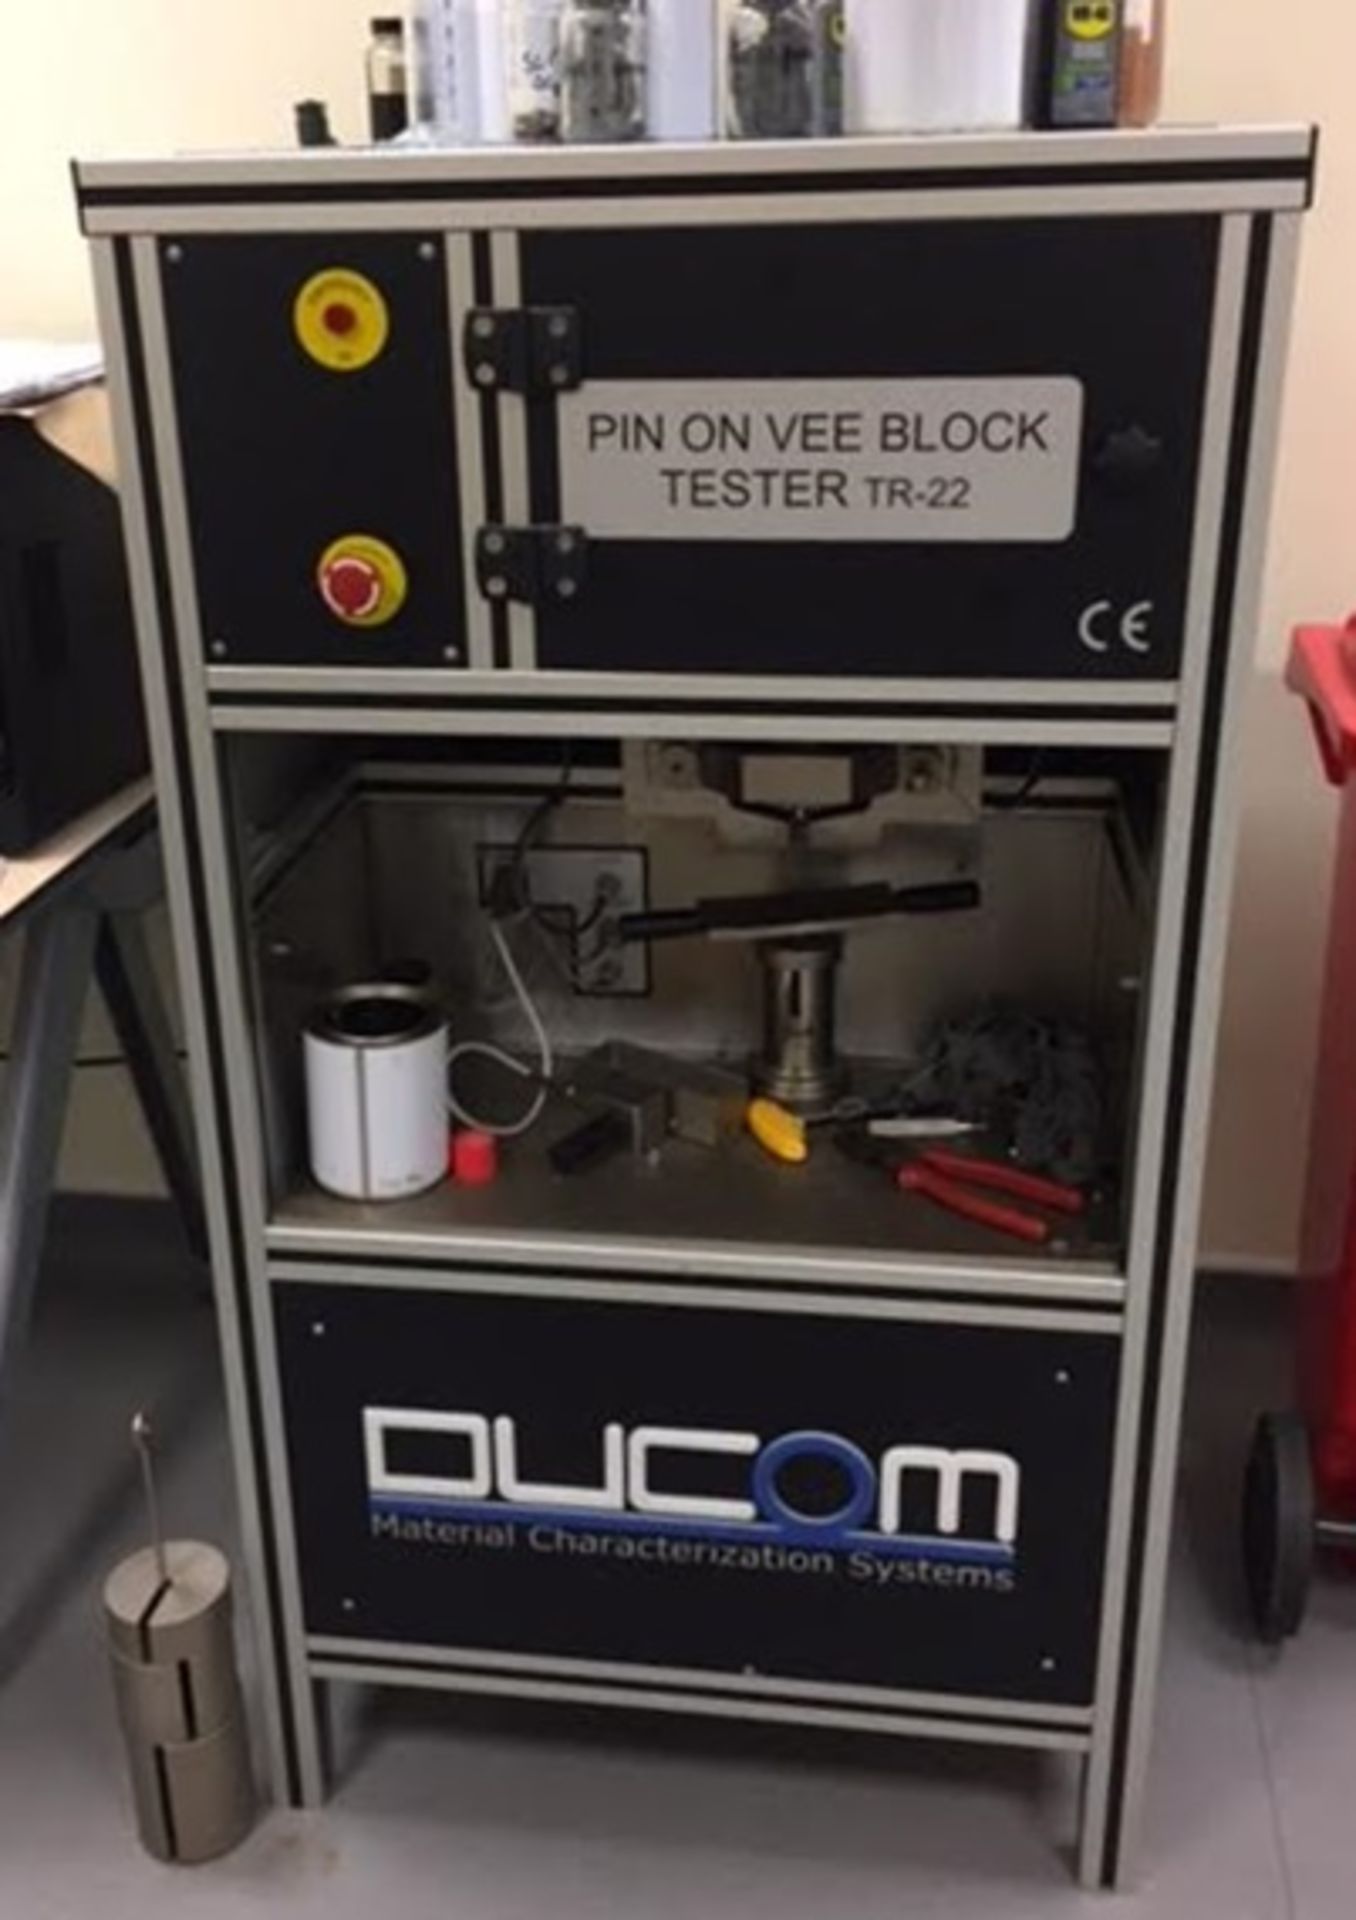 1 x Ducom TR22 Pin and Vee Block Tester - Used to Evaluate Wear Preventive and Load Carrying - Image 6 of 9